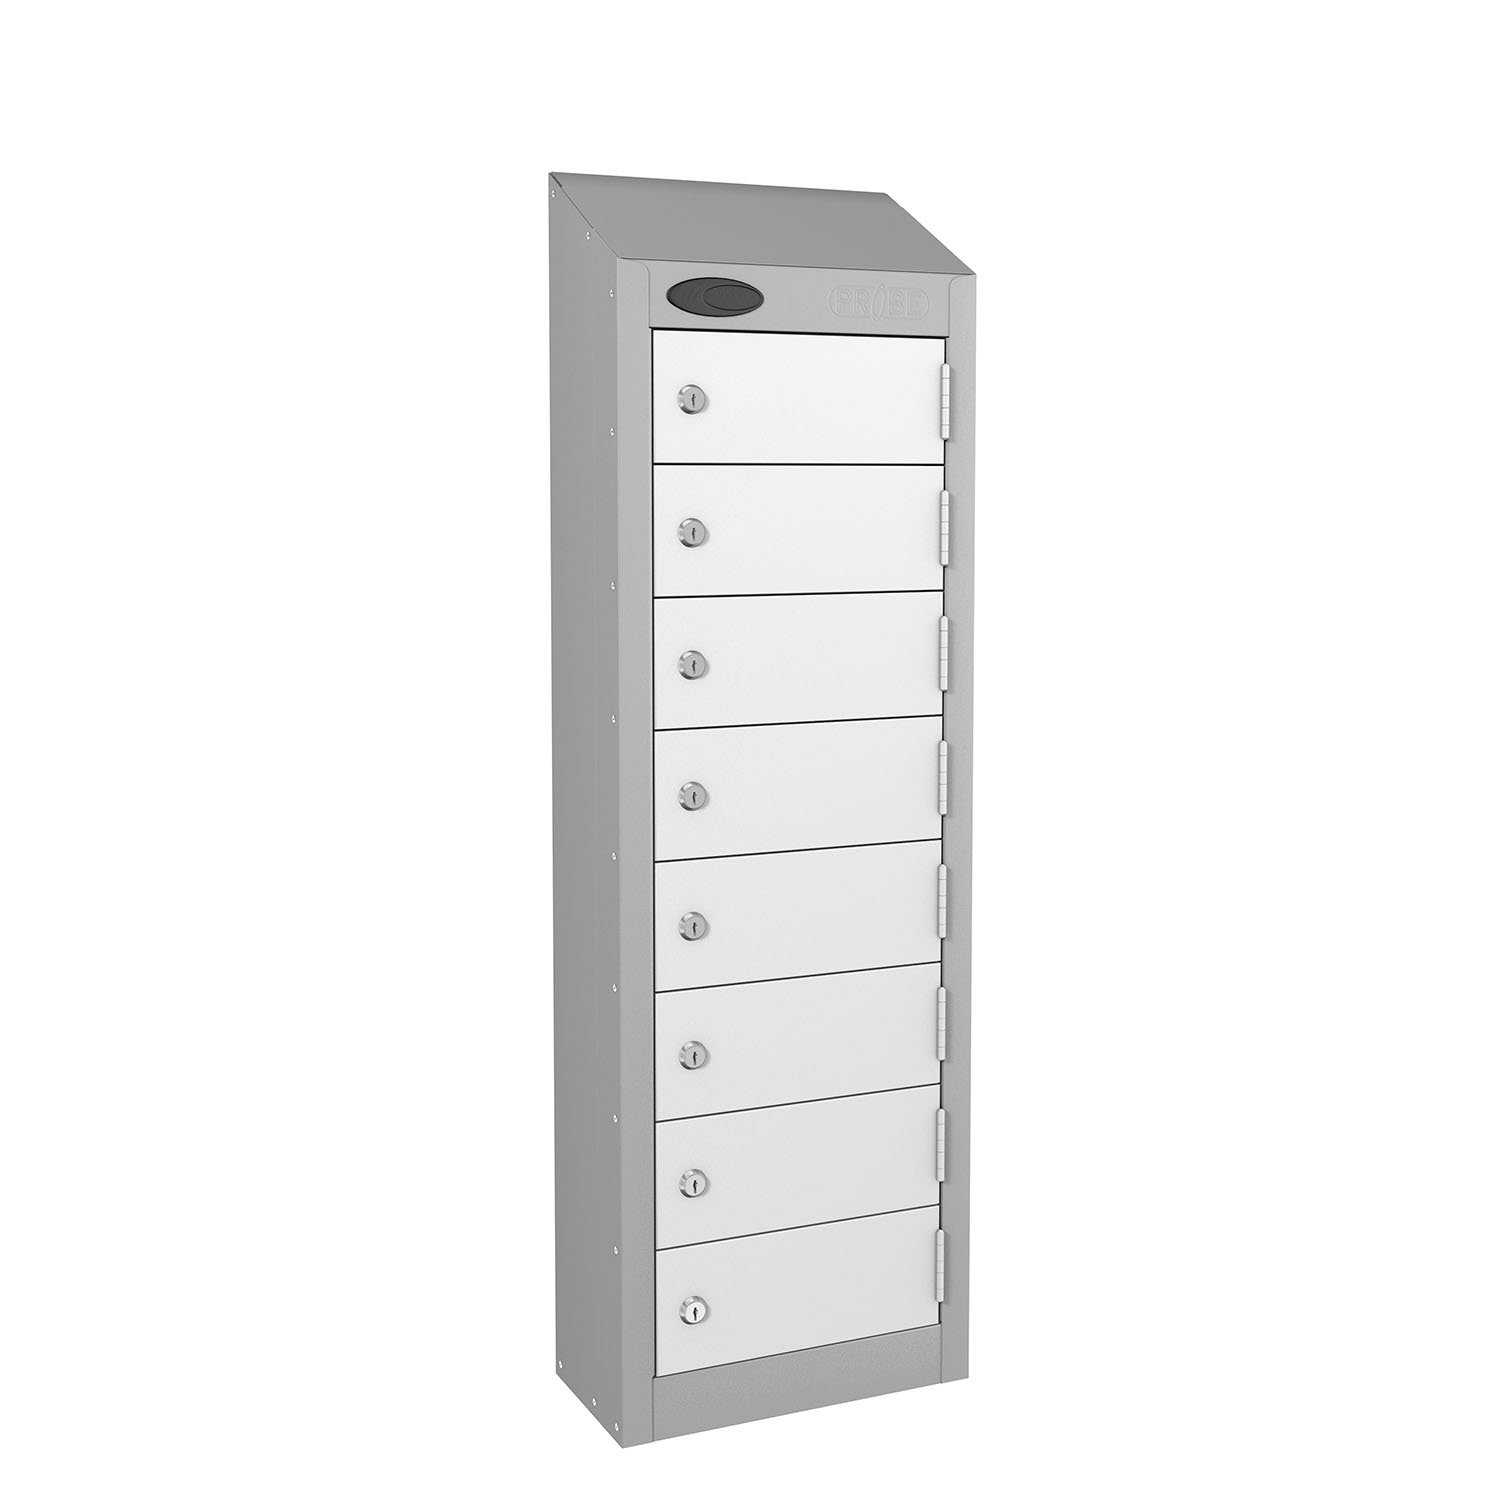 Probe 8 doors small compartment personal lockers in white colour